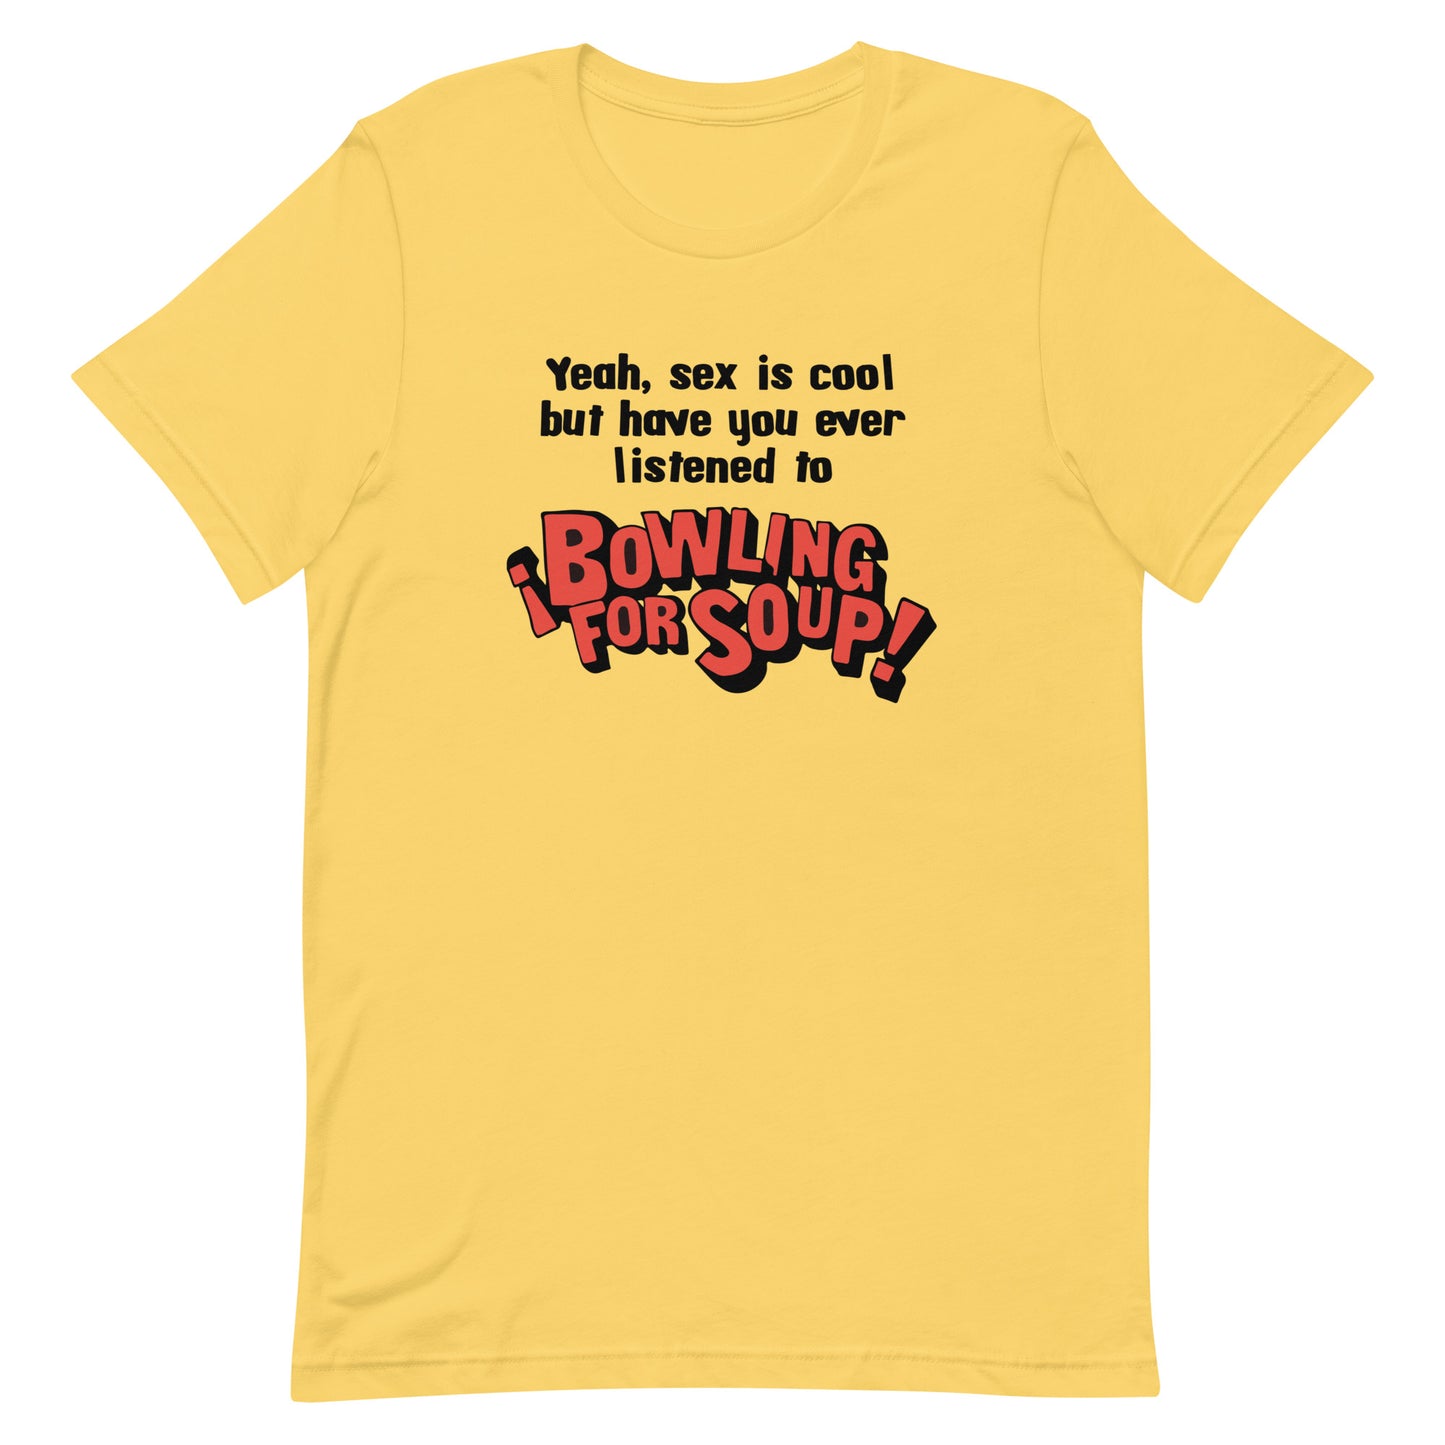 Have You Ever Listened to Bowling For Soup? Unisex t-shirt